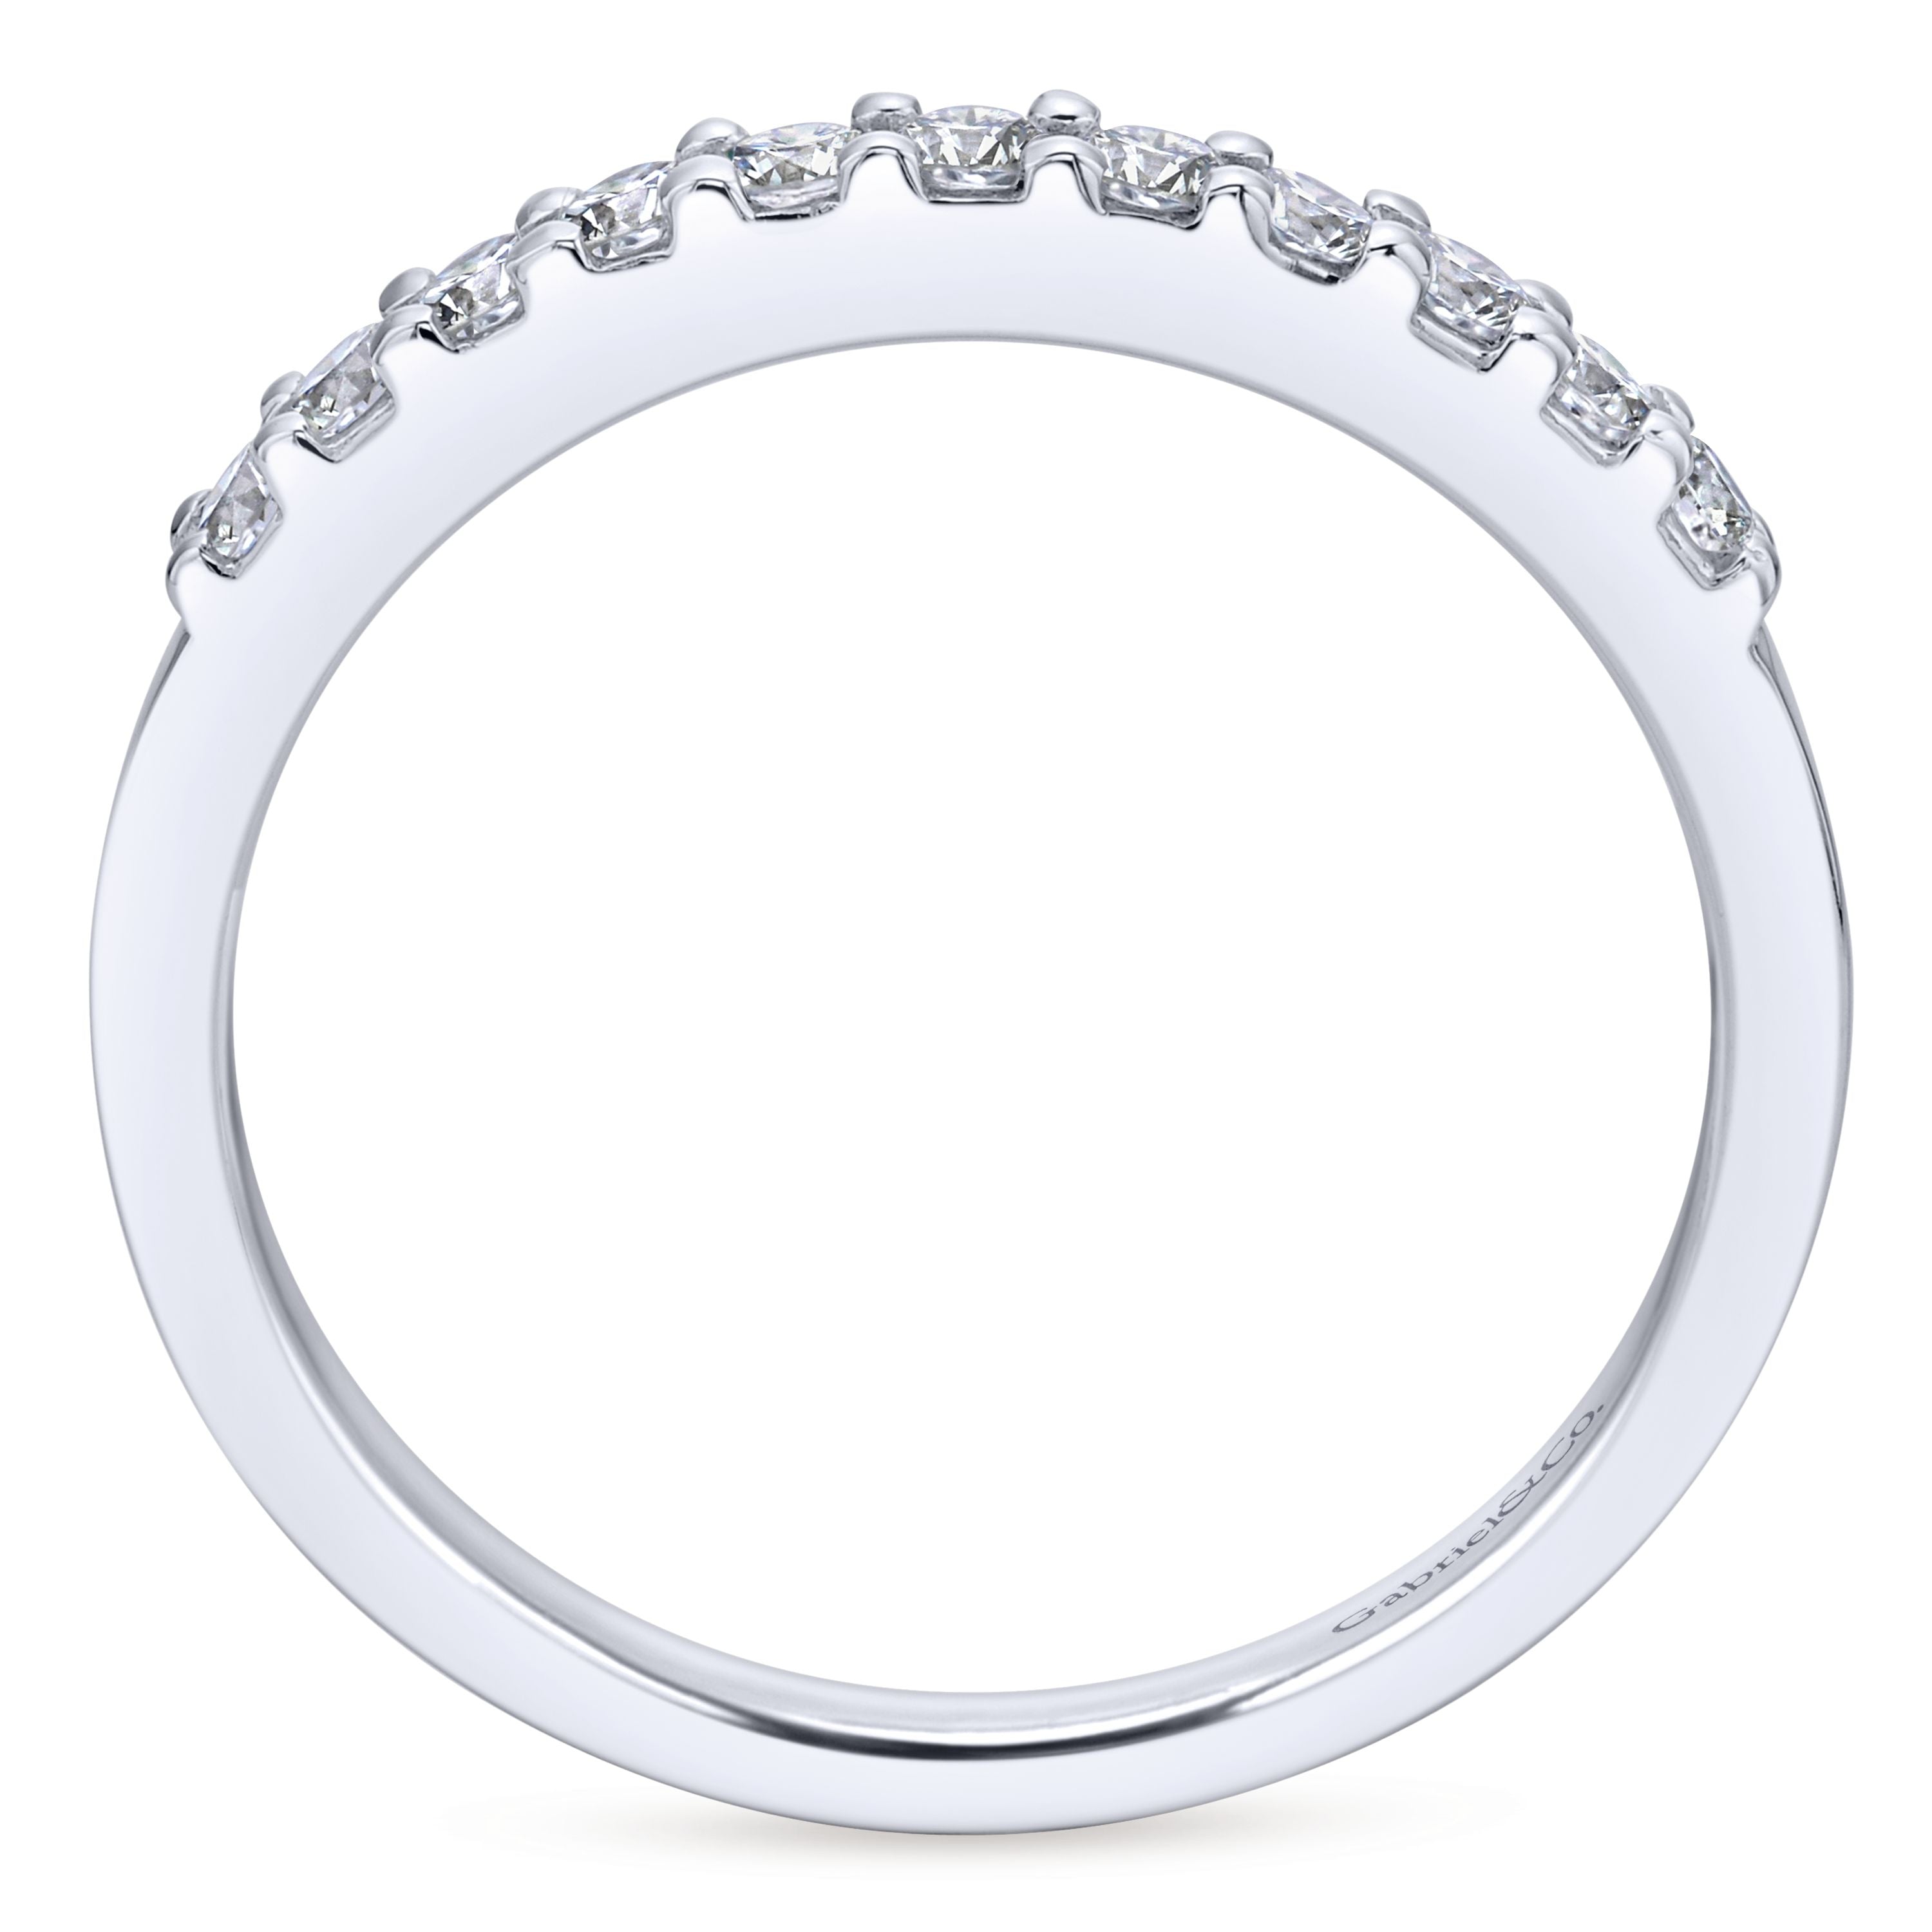 Platinum ring with 11 round diamonds by Gabriel & Co